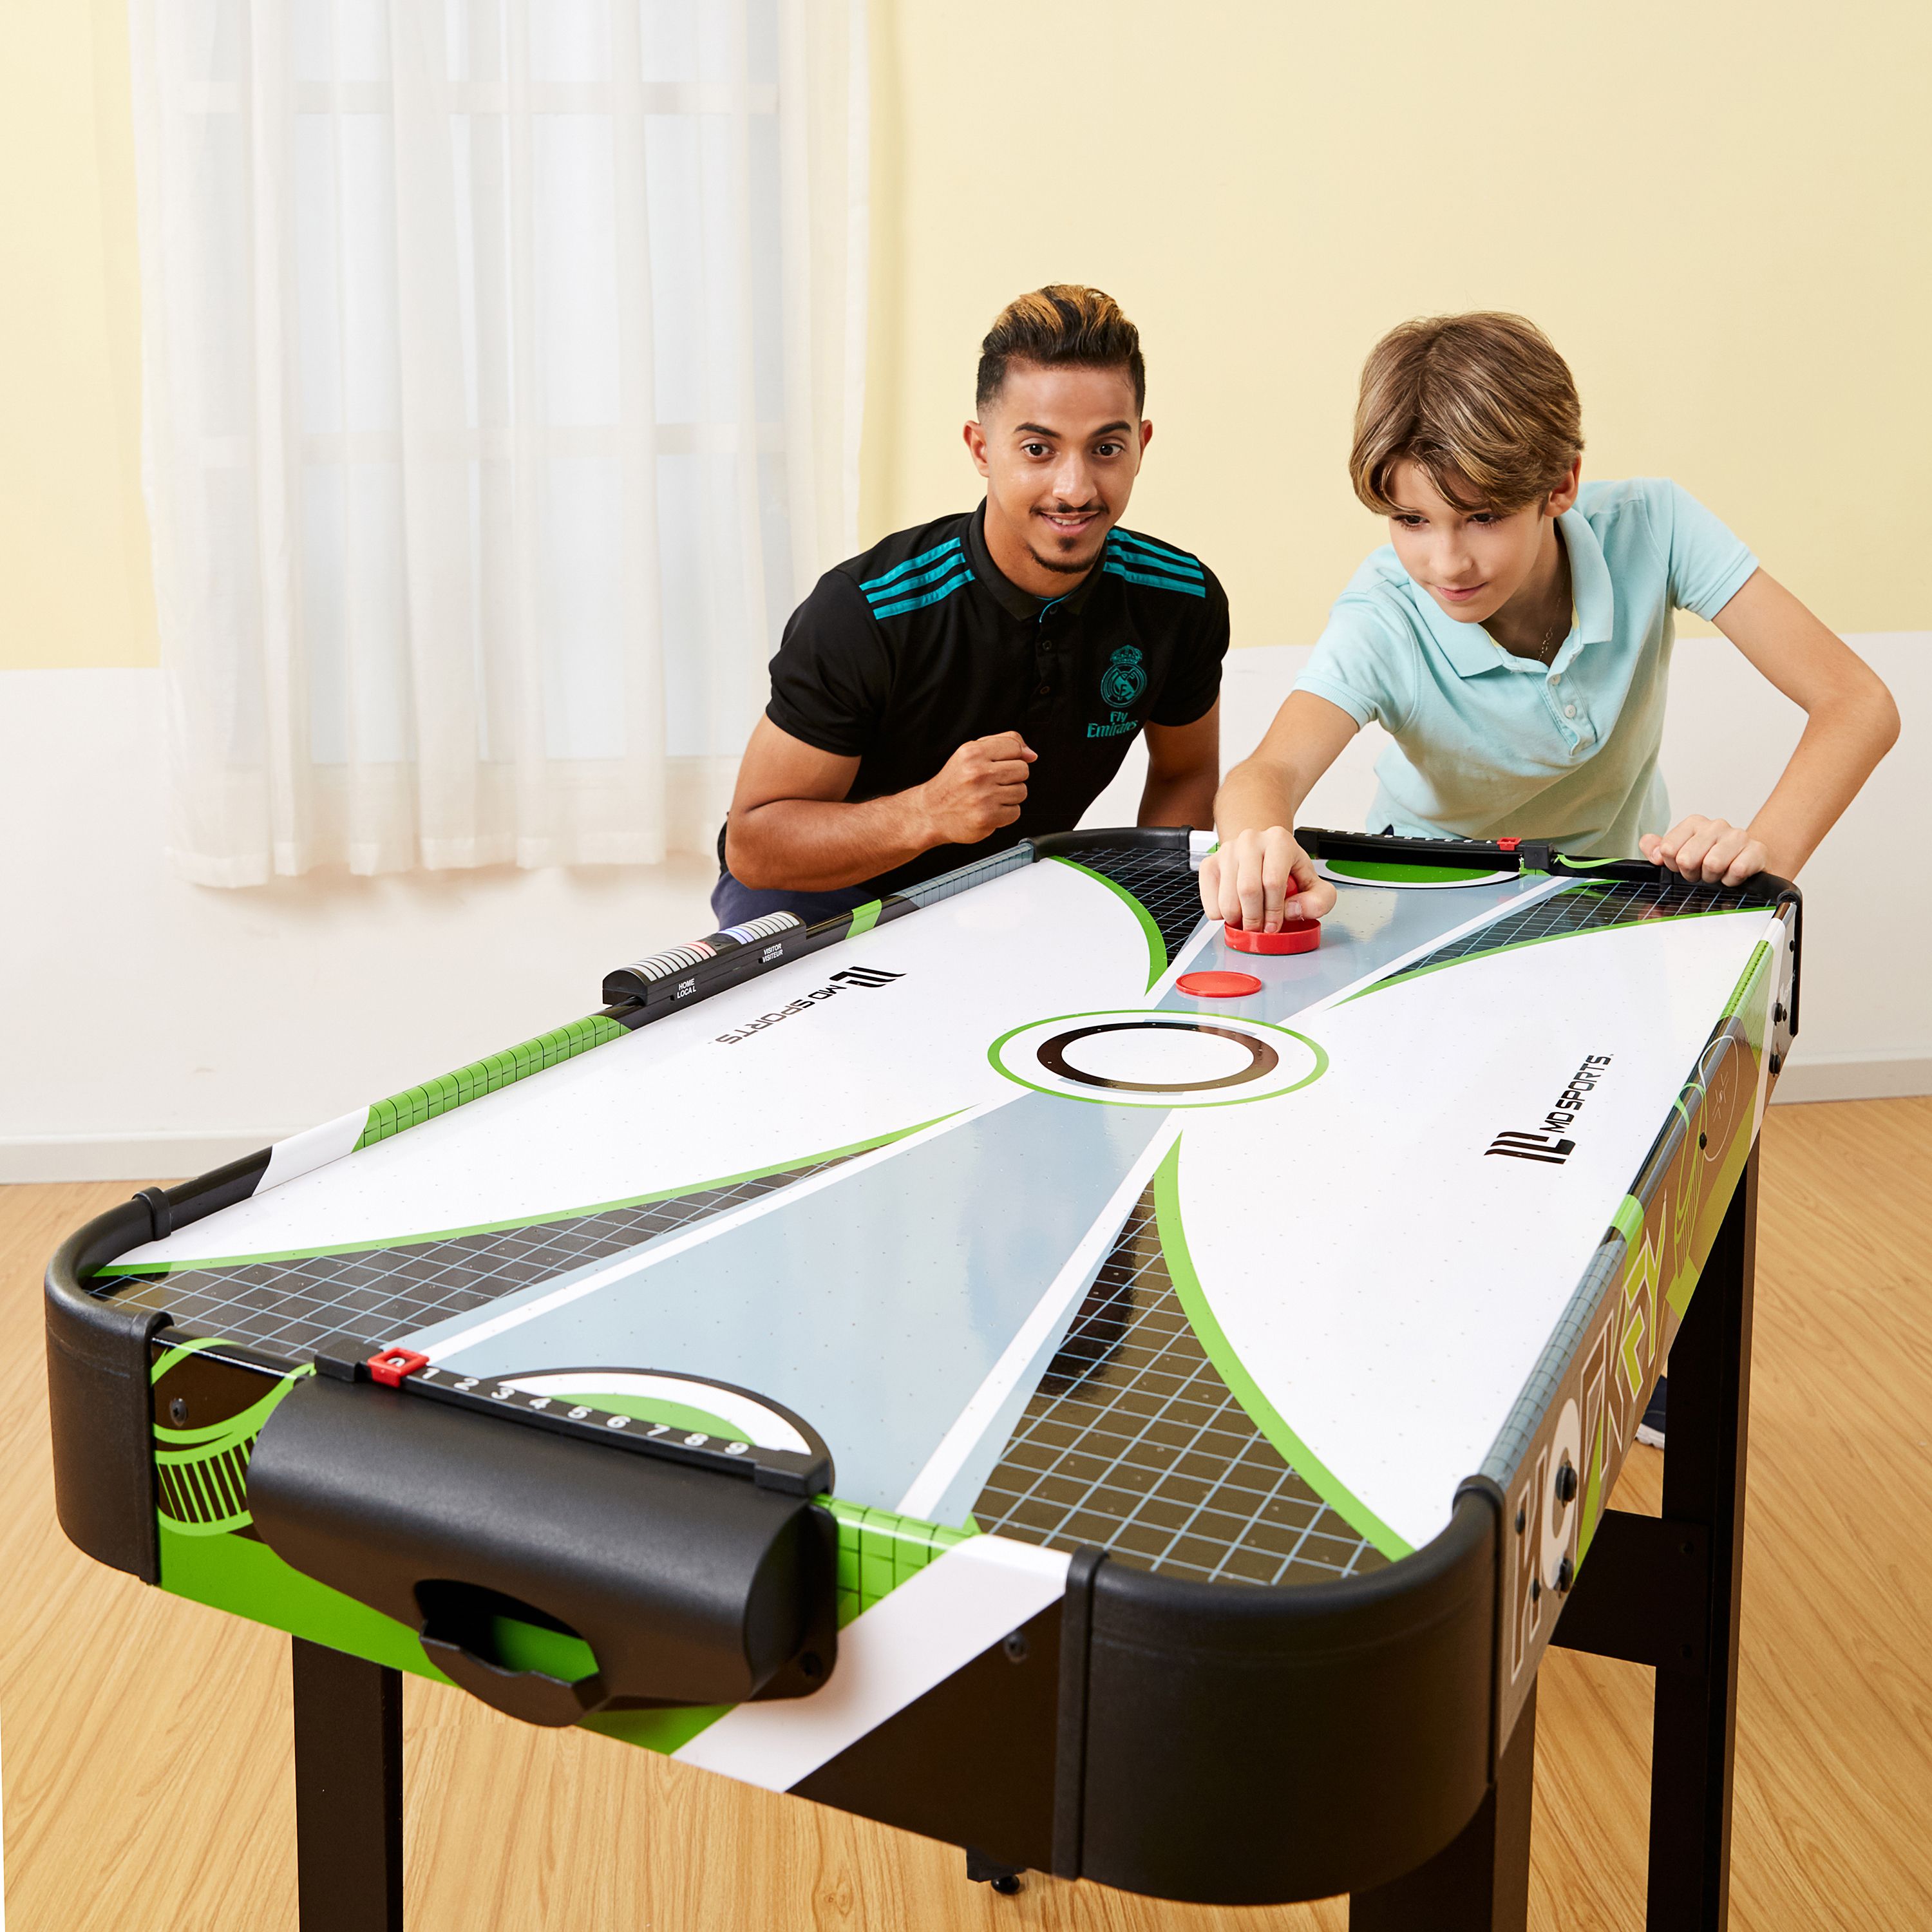 MD Sports 48" Air Powered Hockey Game Table, LED Electronic Scorer, Black/Green - image 3 of 9